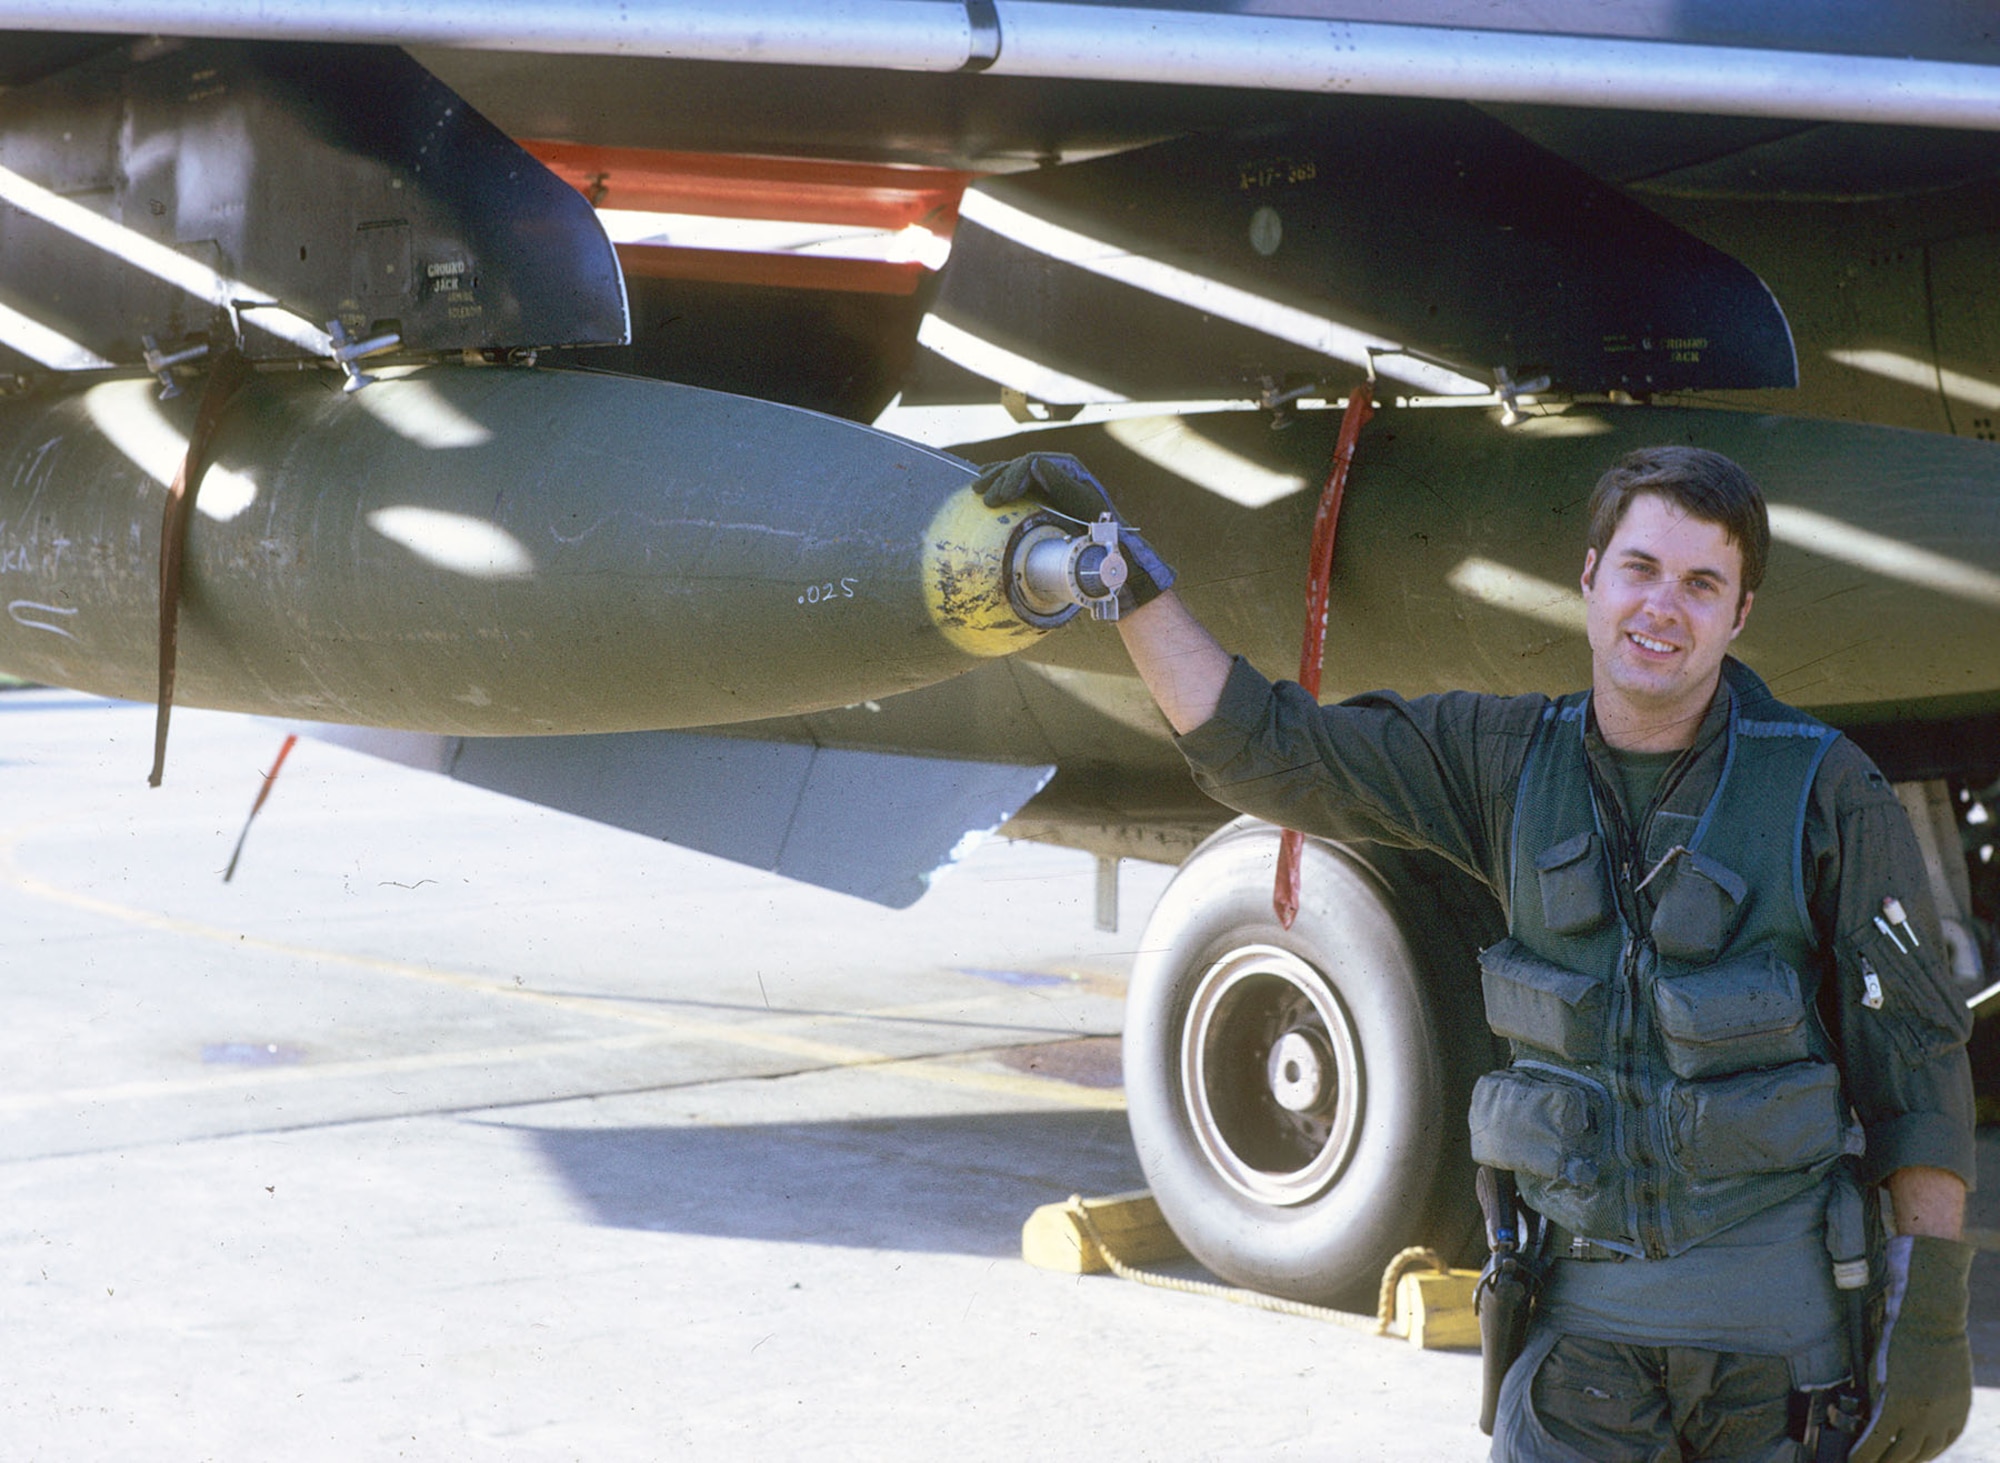 1st Lt. William Wilson, an F-111A weapon system officer in the 429th Tactical Fighter Squadron, ejected over North Vietnam when his aircraft was hit during a Linebacker II mission. After evading for five days, Wilson was captured. Wilson and the pilot, Capt. Robert Sponeybarger, were both released at the war’s end. (U.S. Air Force photo)